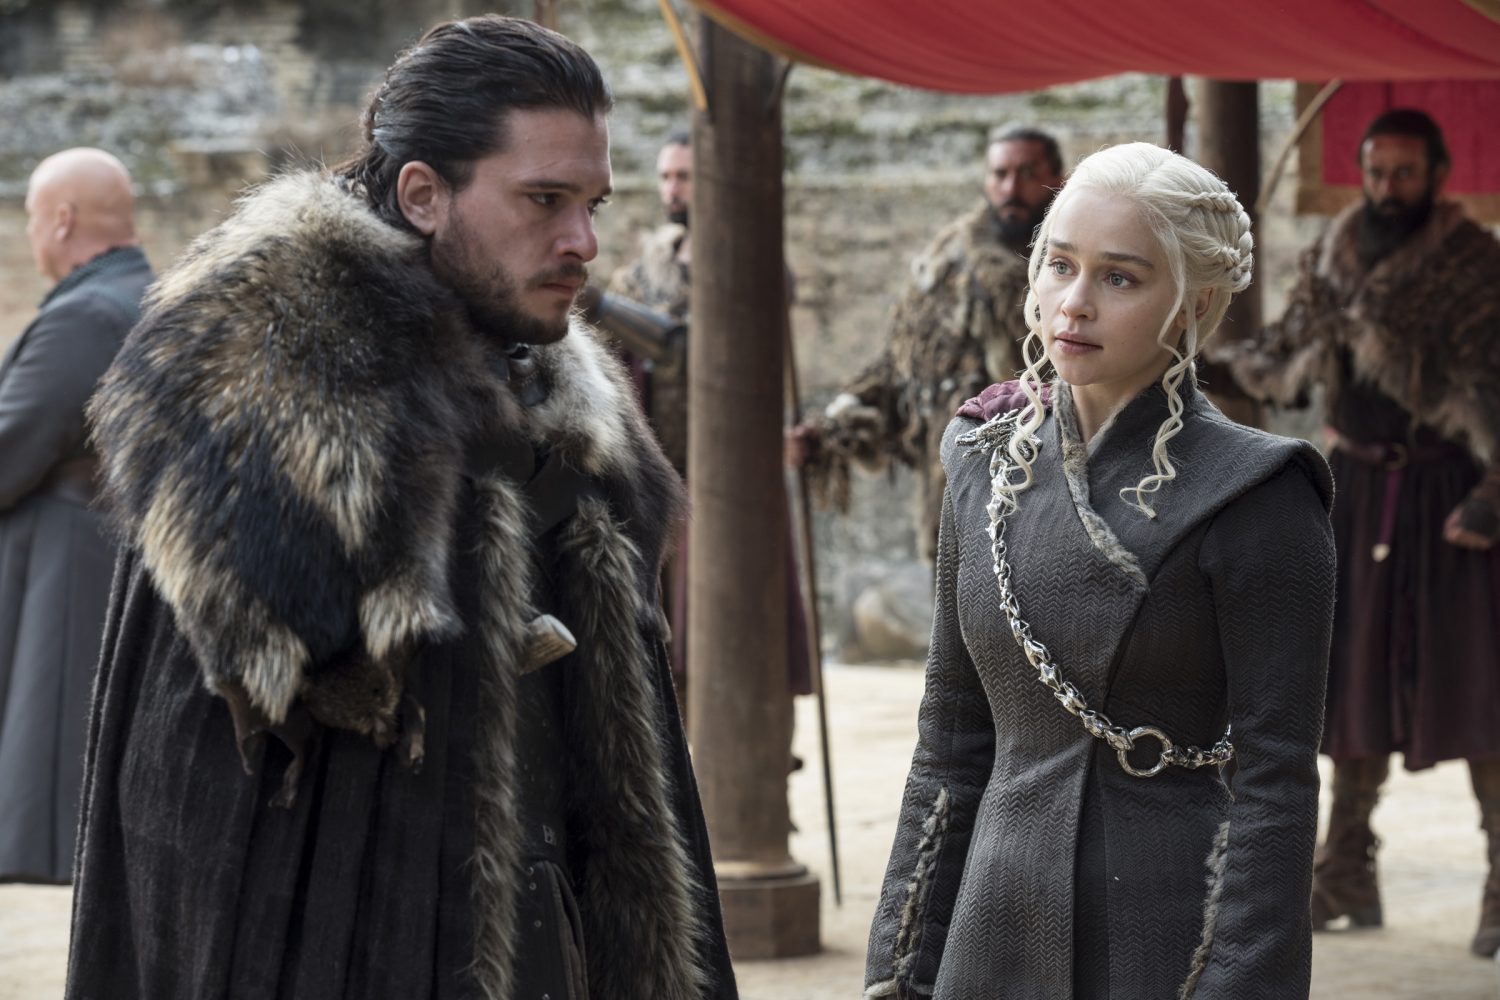 This image released by HBO shows Kit Harington, left, and Emilia Clarke on the season finale of "Game of Thrones." (Macall B. Polay, HBO via AP)